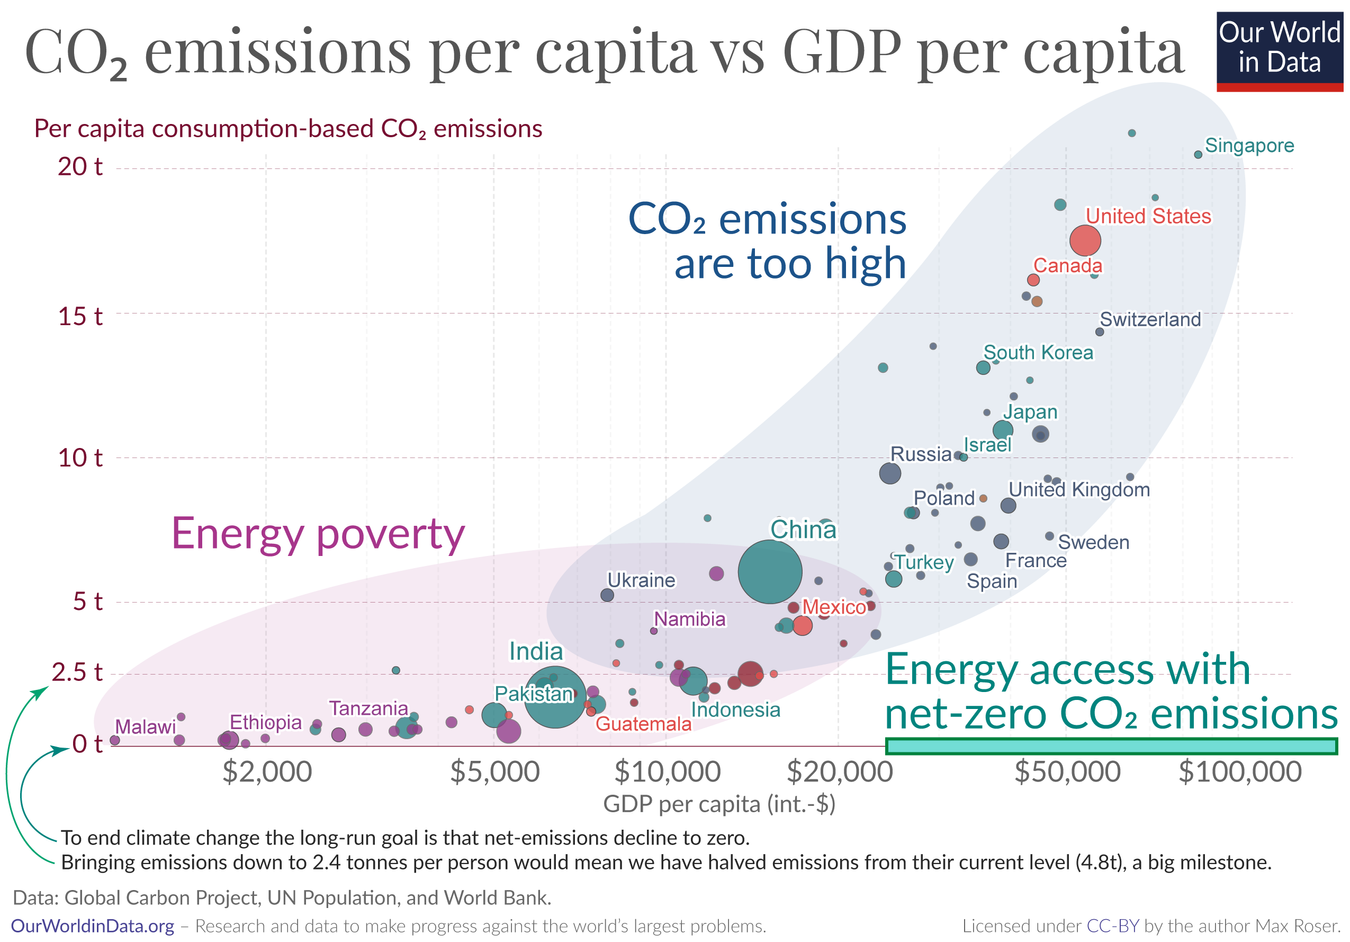 https://ourworldindata.org/images/published/energy-poverty-vs-unsustainable-greenhouse-gas-emissions_1350.png